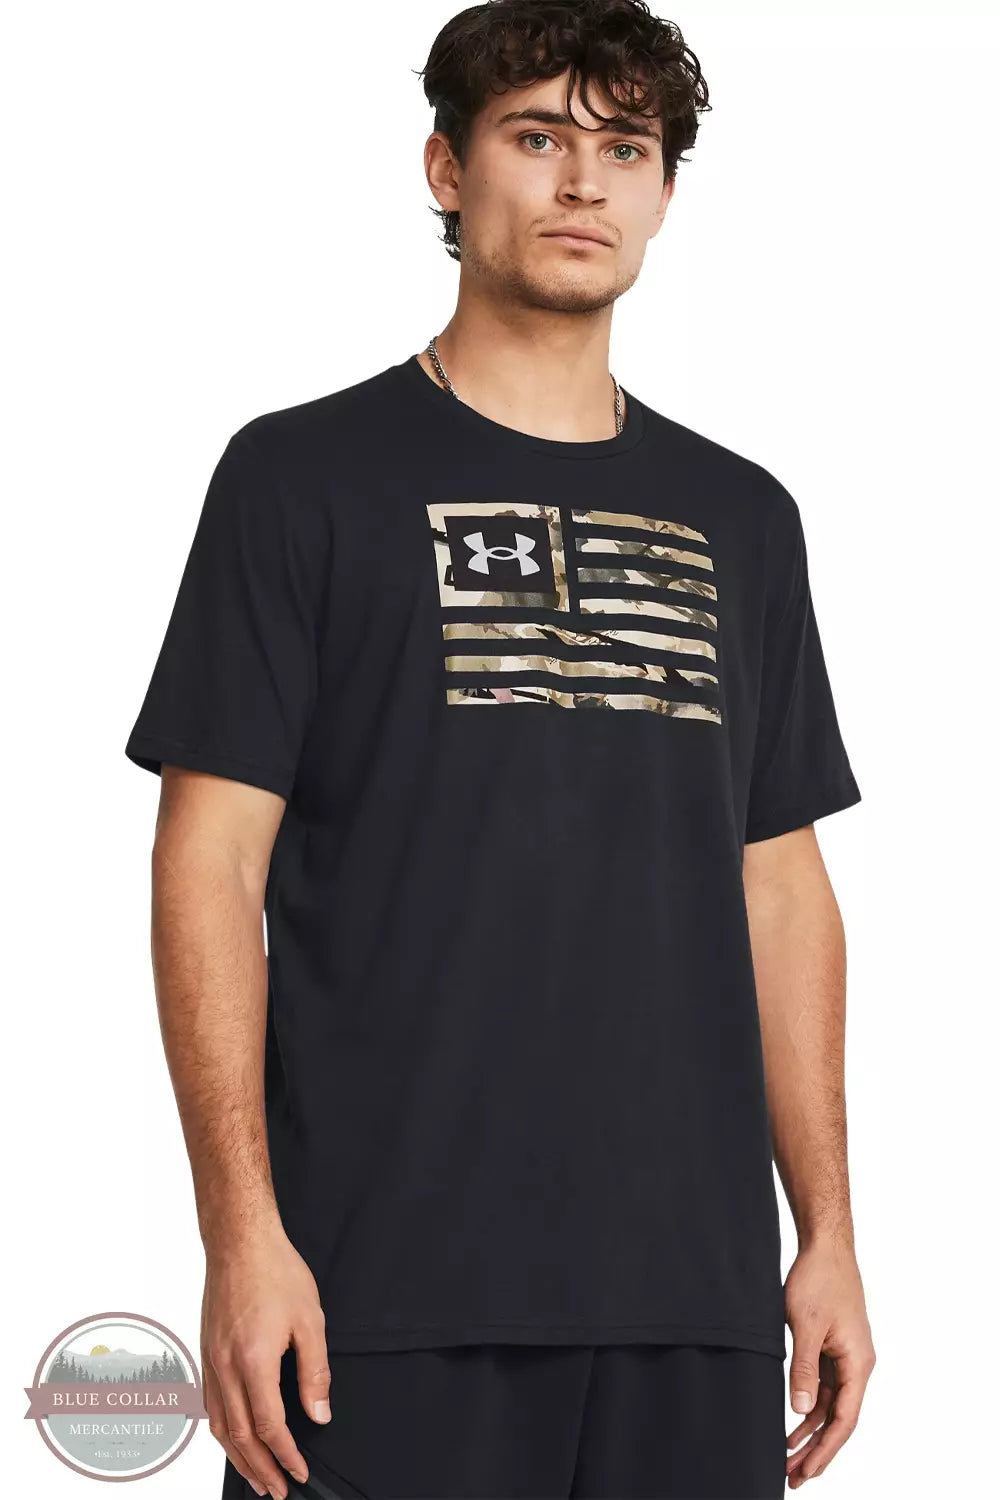 Under Armour 1382969-001 Freedom Flag Short Sleeve T-Shirt Front View